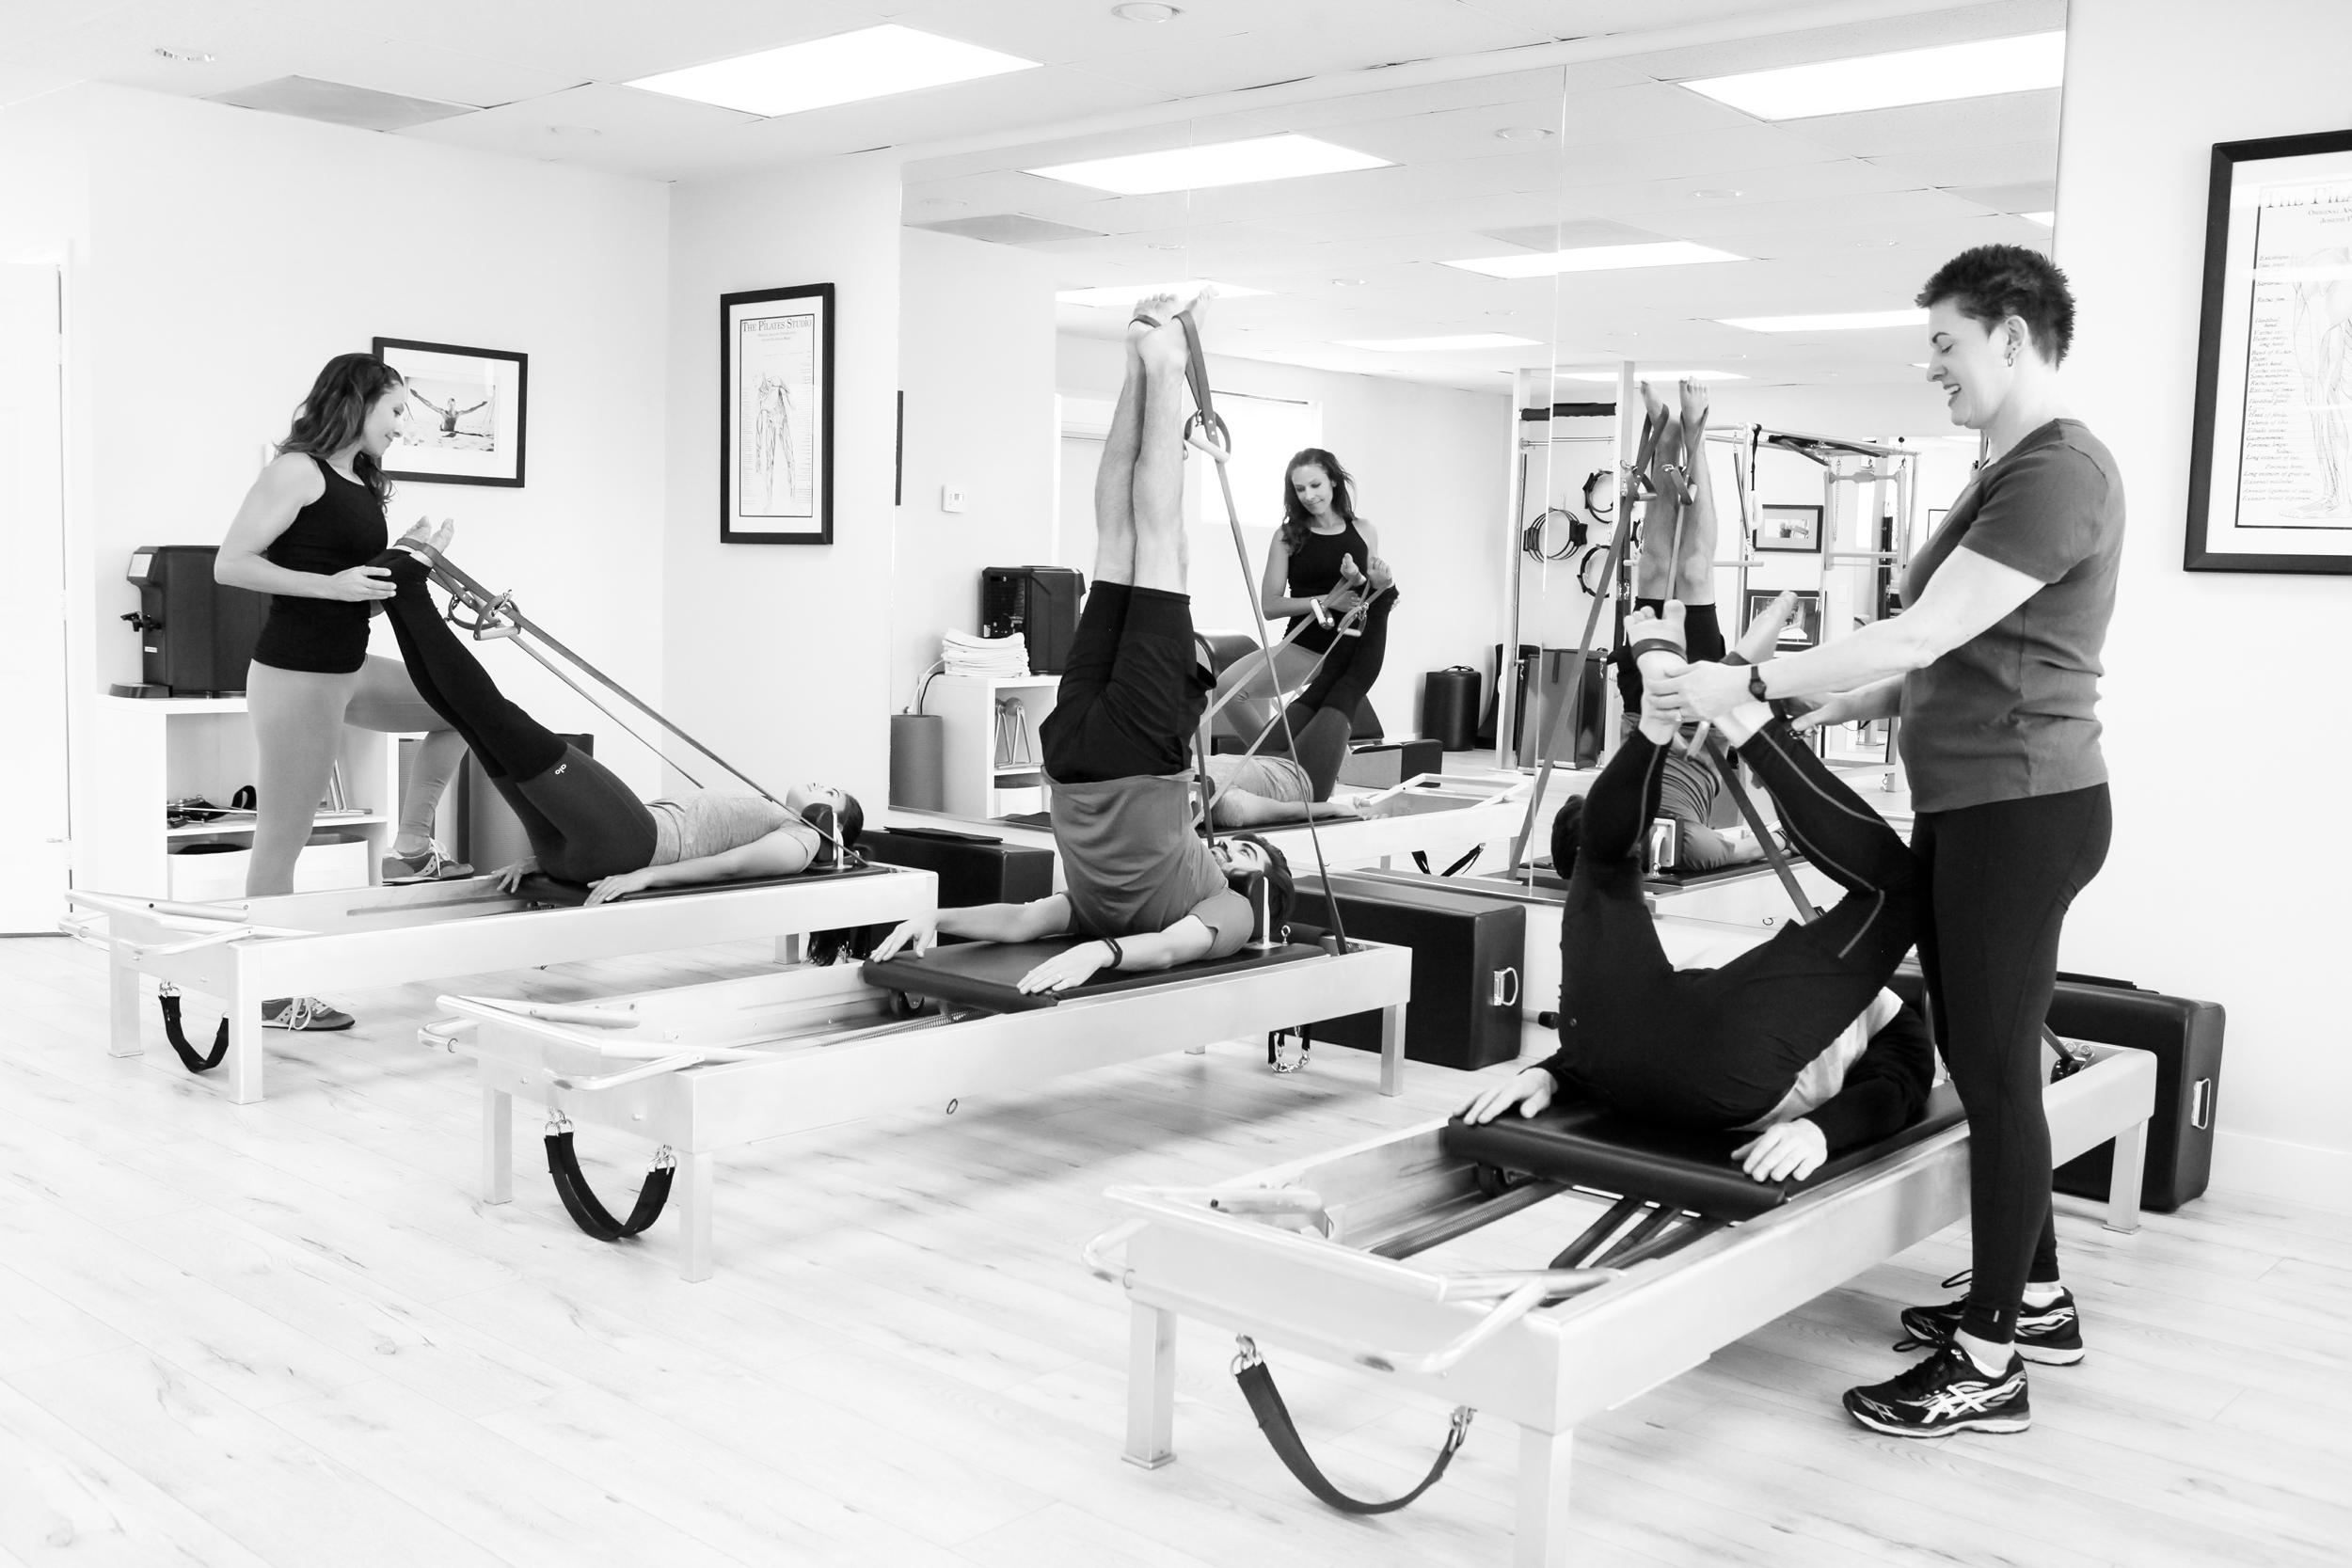 Teachers working with Pilates students